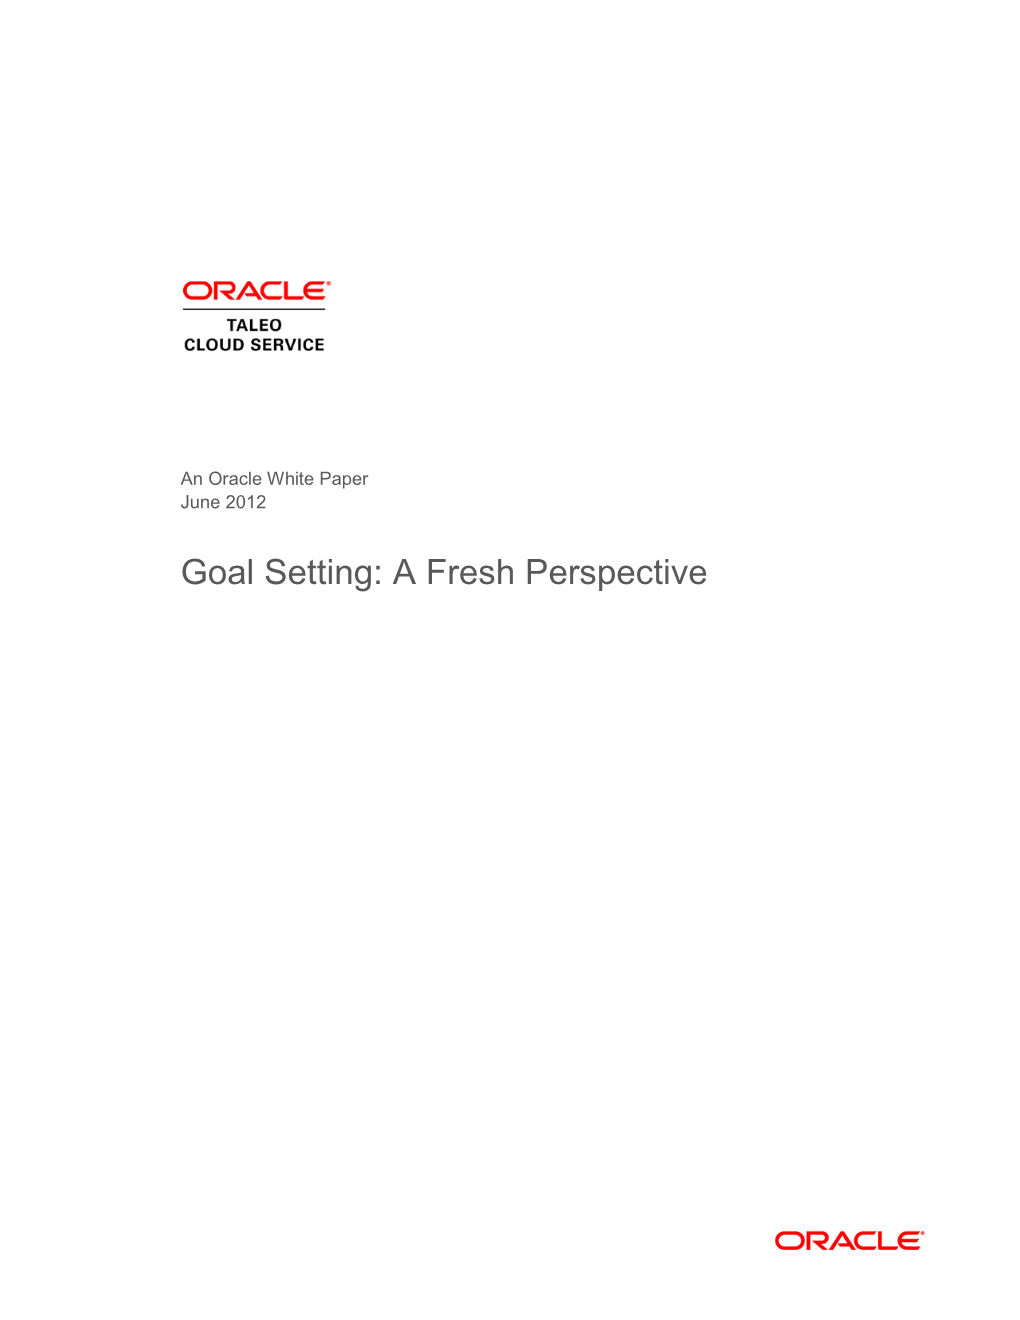 Goal Setting: a Fresh Perspective